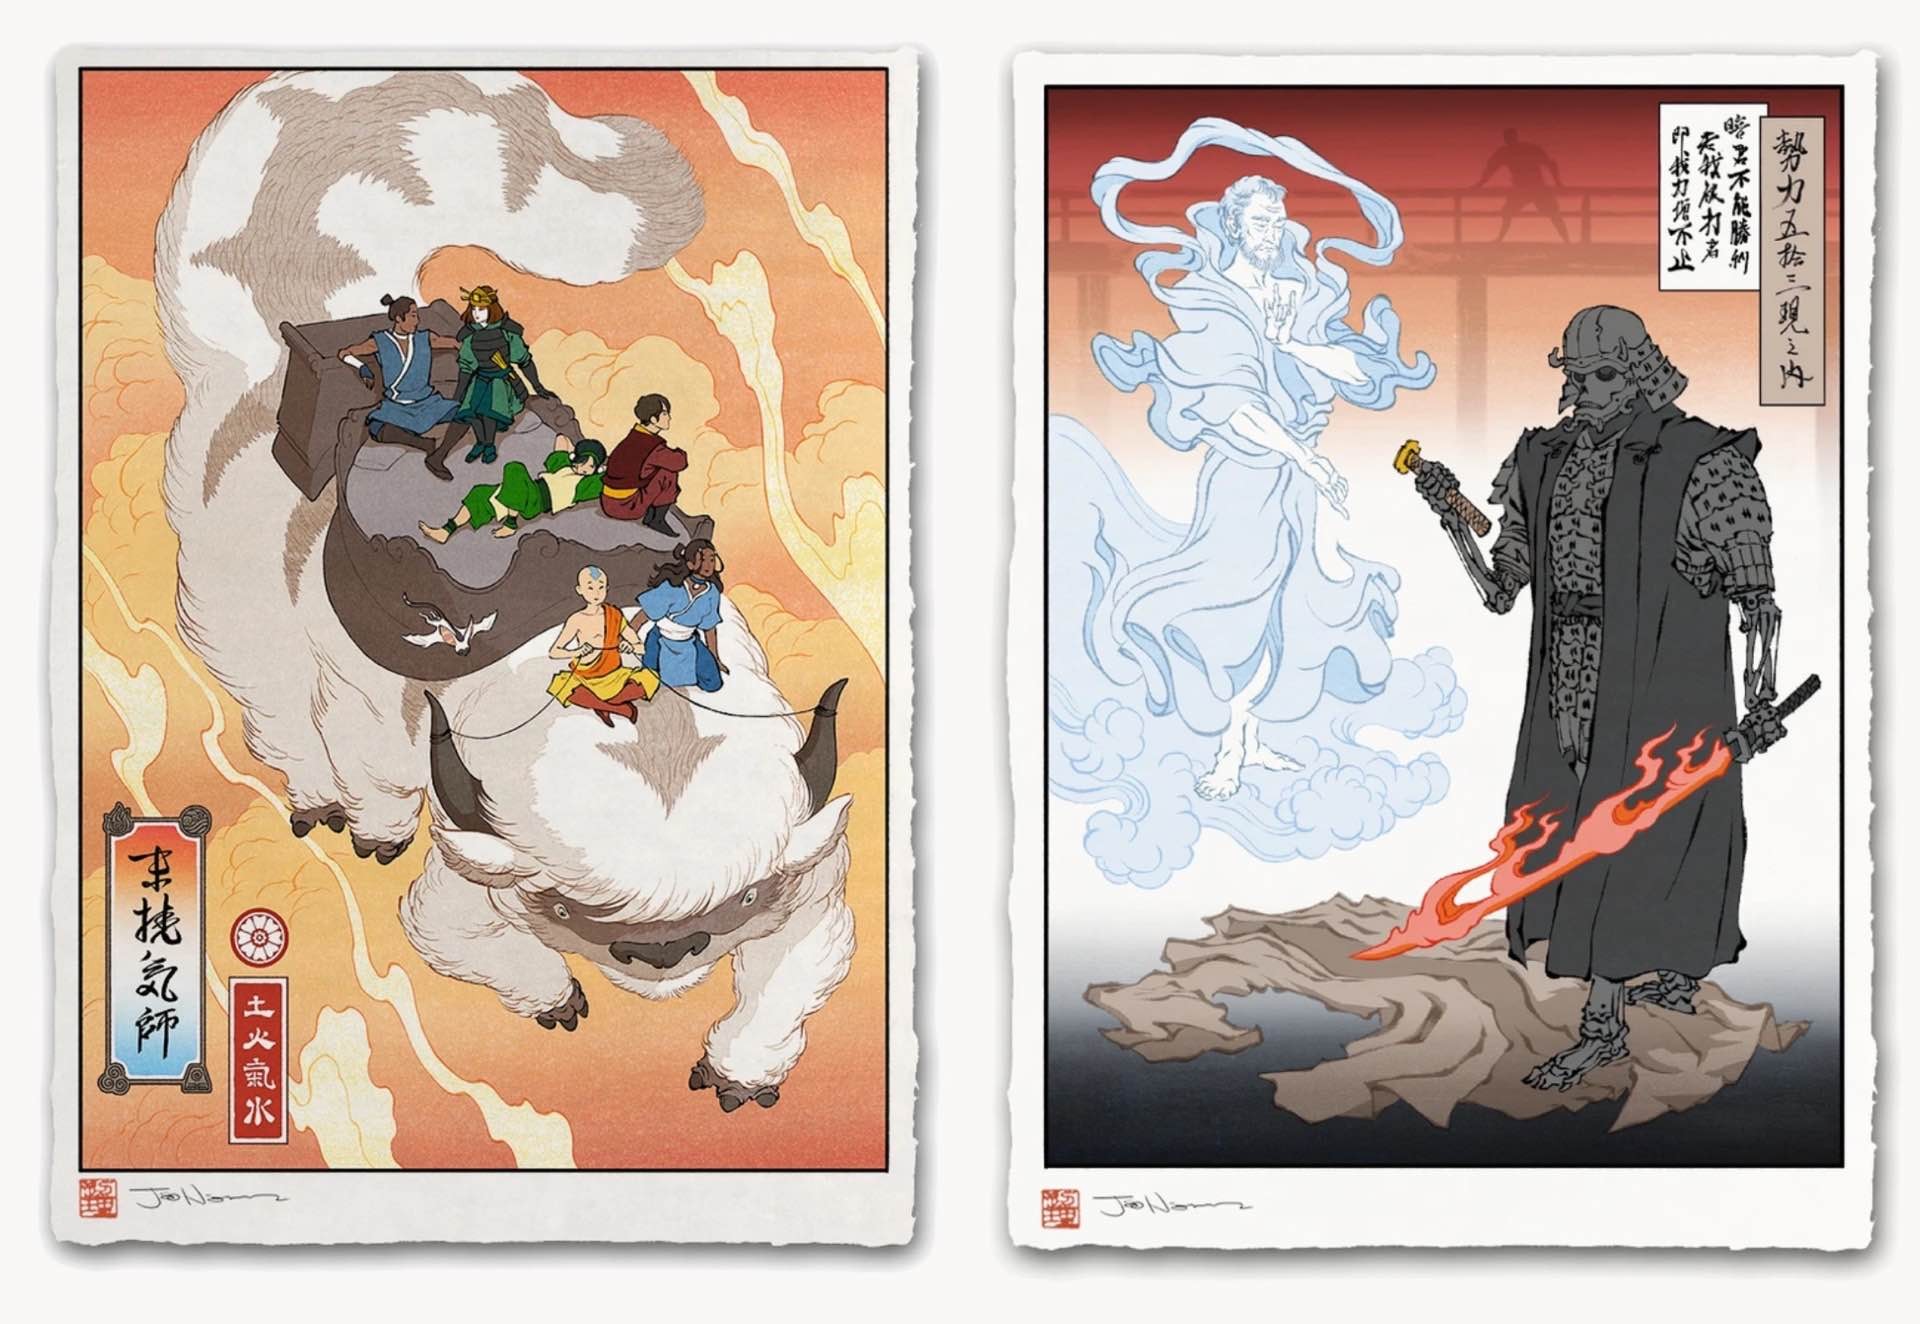 Pictured here are prints based on Avatar: The Last Airbender (“True Companions”) and Star Wars (“Struck Down”).